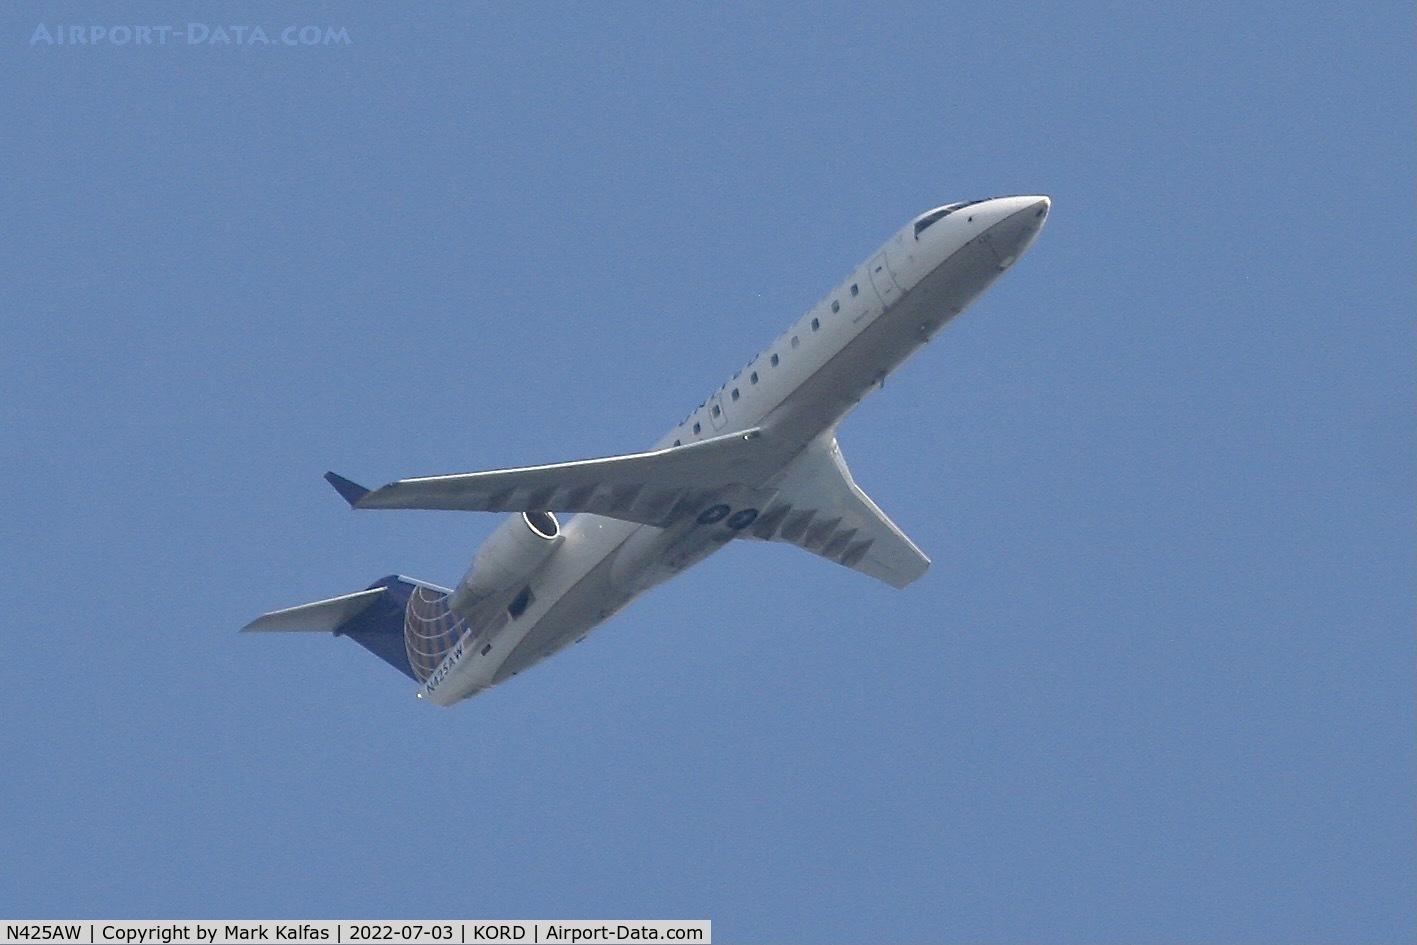 N425AW, 2002 Bombardier CRJ-200LR (CL-600-2B19) C/N 7663, United Express/Air Wisconsin CRJ on approach to ORD from DAY.